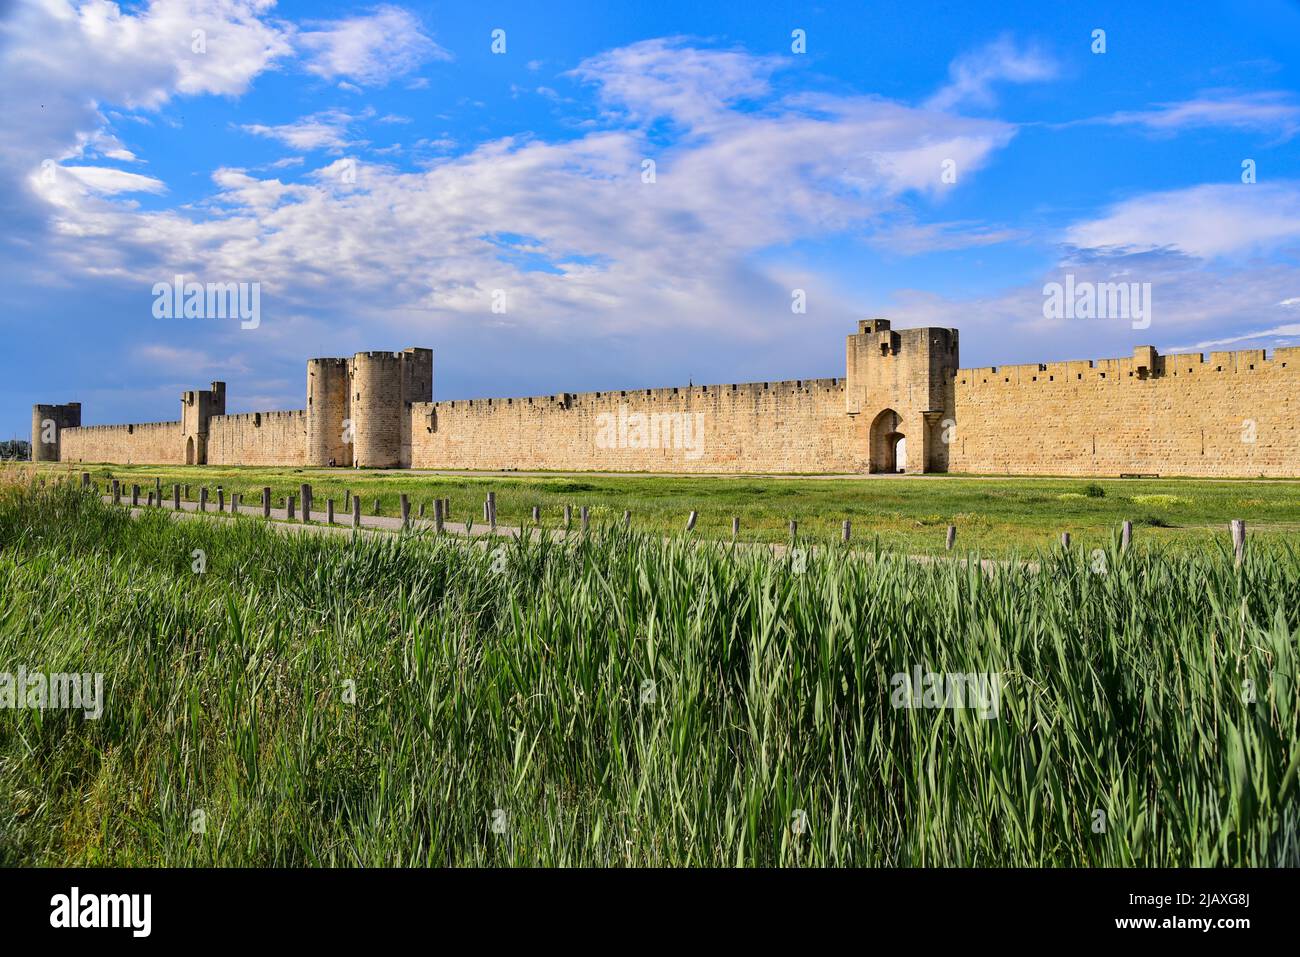 Historical ramparts of the town of Aigues-Mortes in the Camargue, Gard department, Occitania, France, Europe Stock Photo